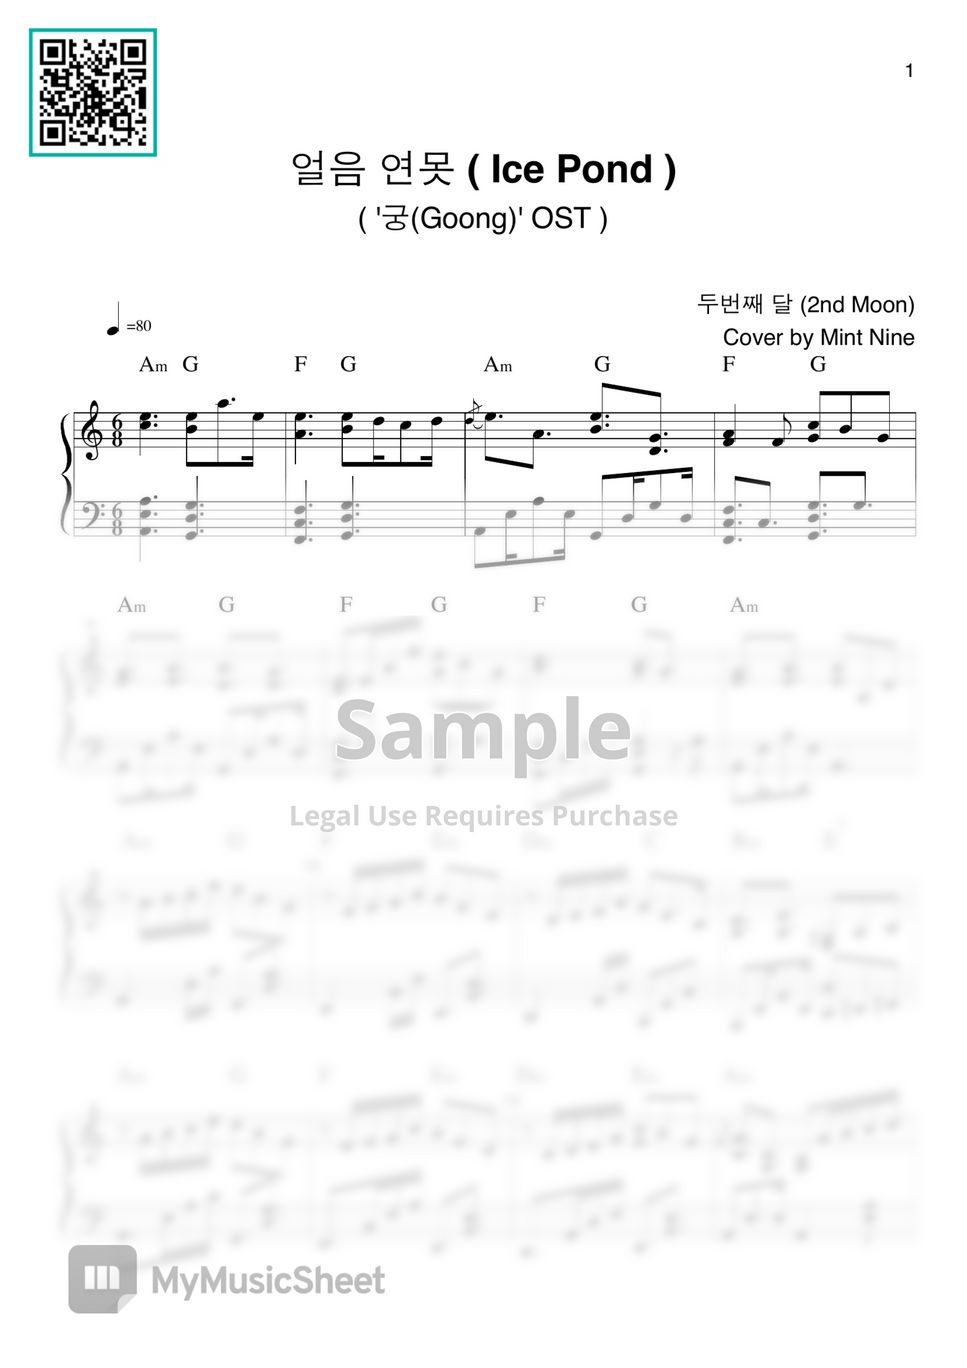 Goong OST - Ice Pond by Mint Nine